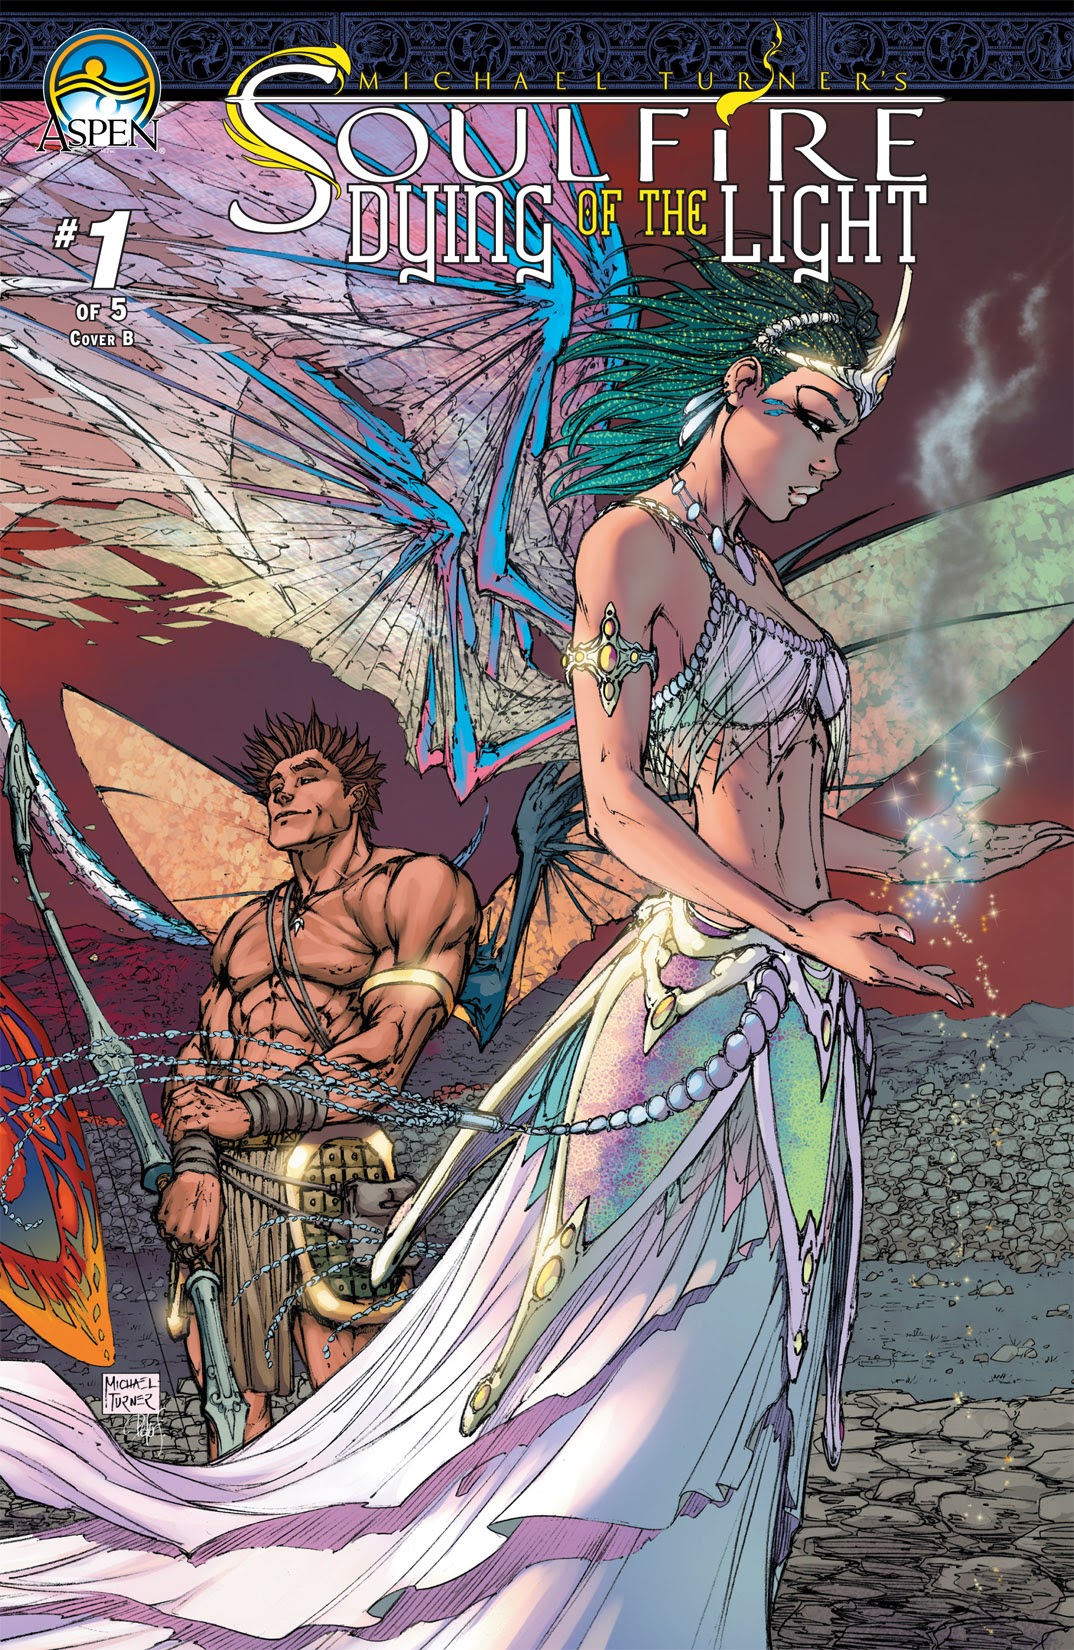 Read online Michael Turner's Soulfire: Shadow Magic comic -  Issue #1 - 2